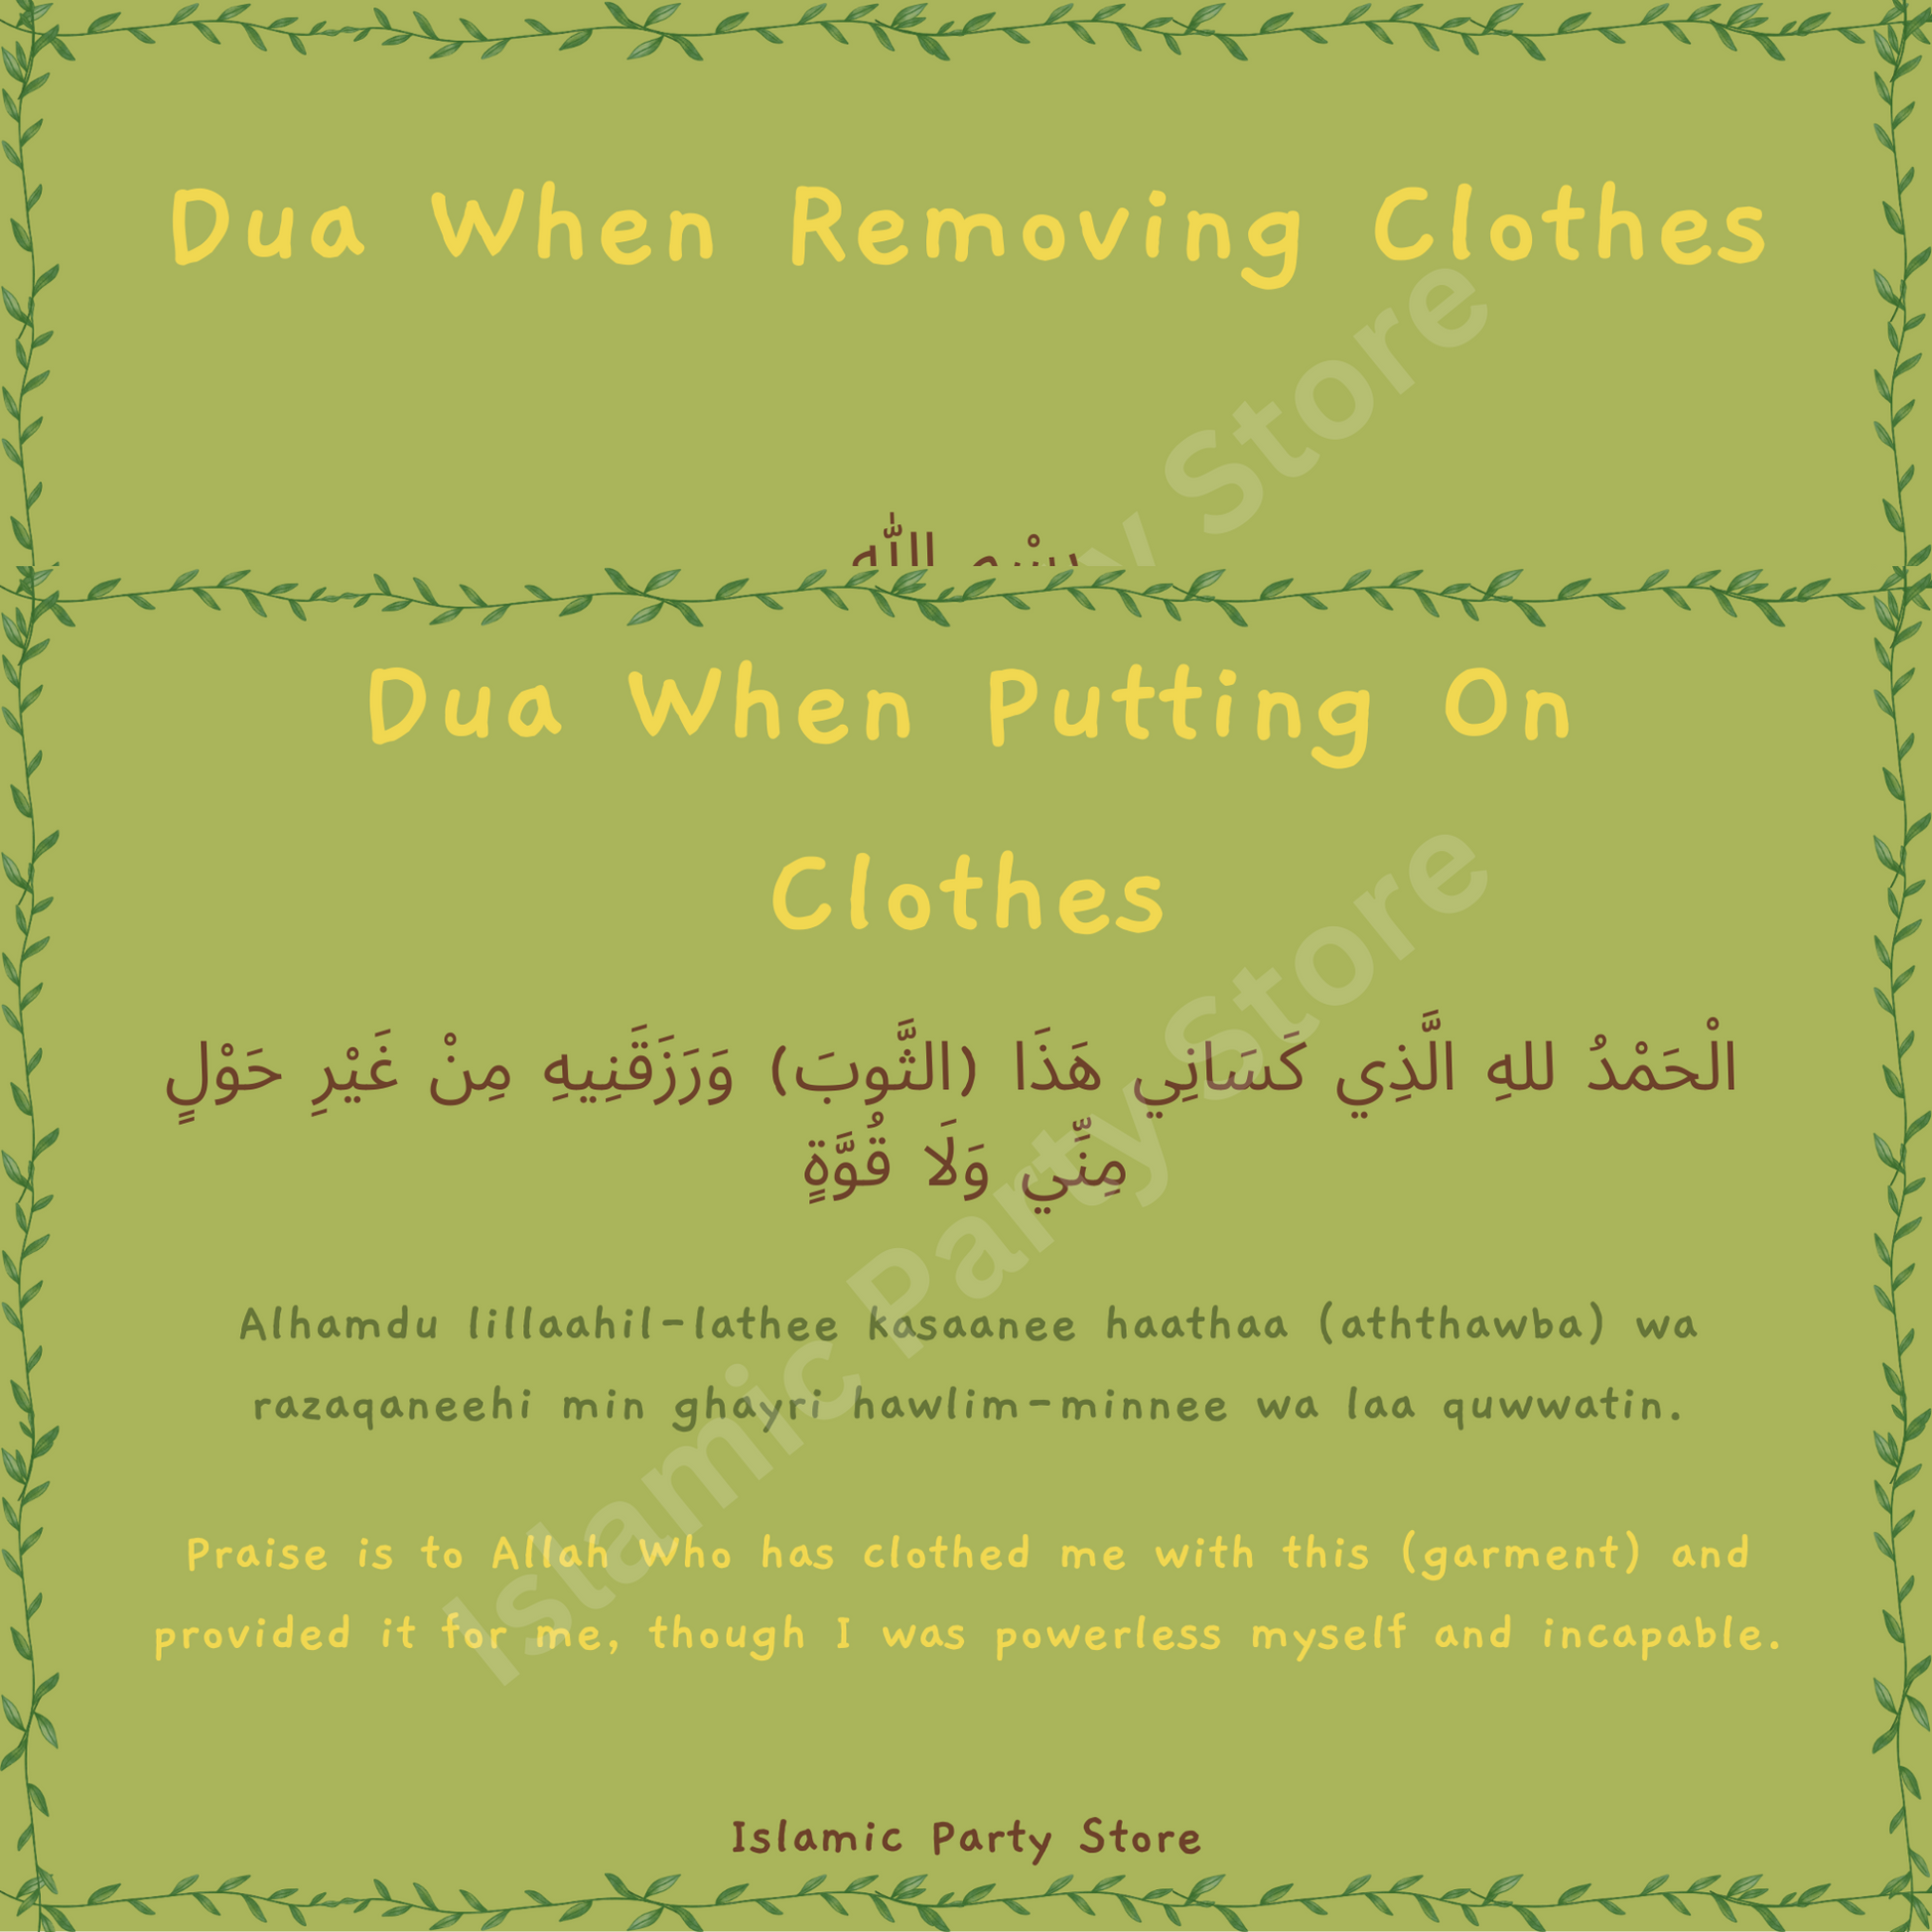 Putting on and removing clothes dua set